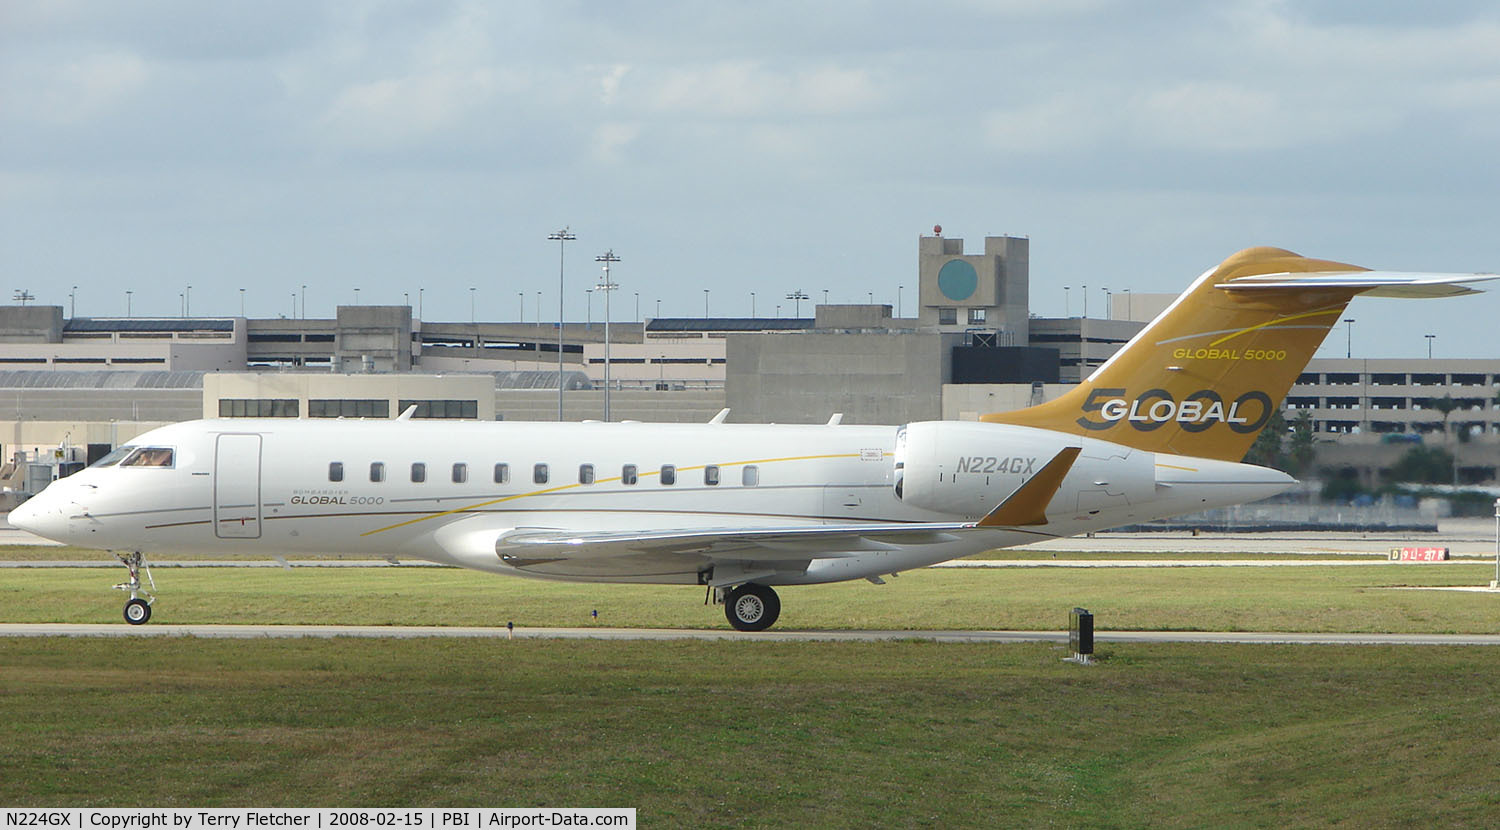 N224GX, 2006 Bombardier BD-700-1A11 Global 5000 C/N 9224, The business aircraft traffic at West Palm Beach on the Friday before President's Day always provides the aviation enthusiast / photographer with a treat